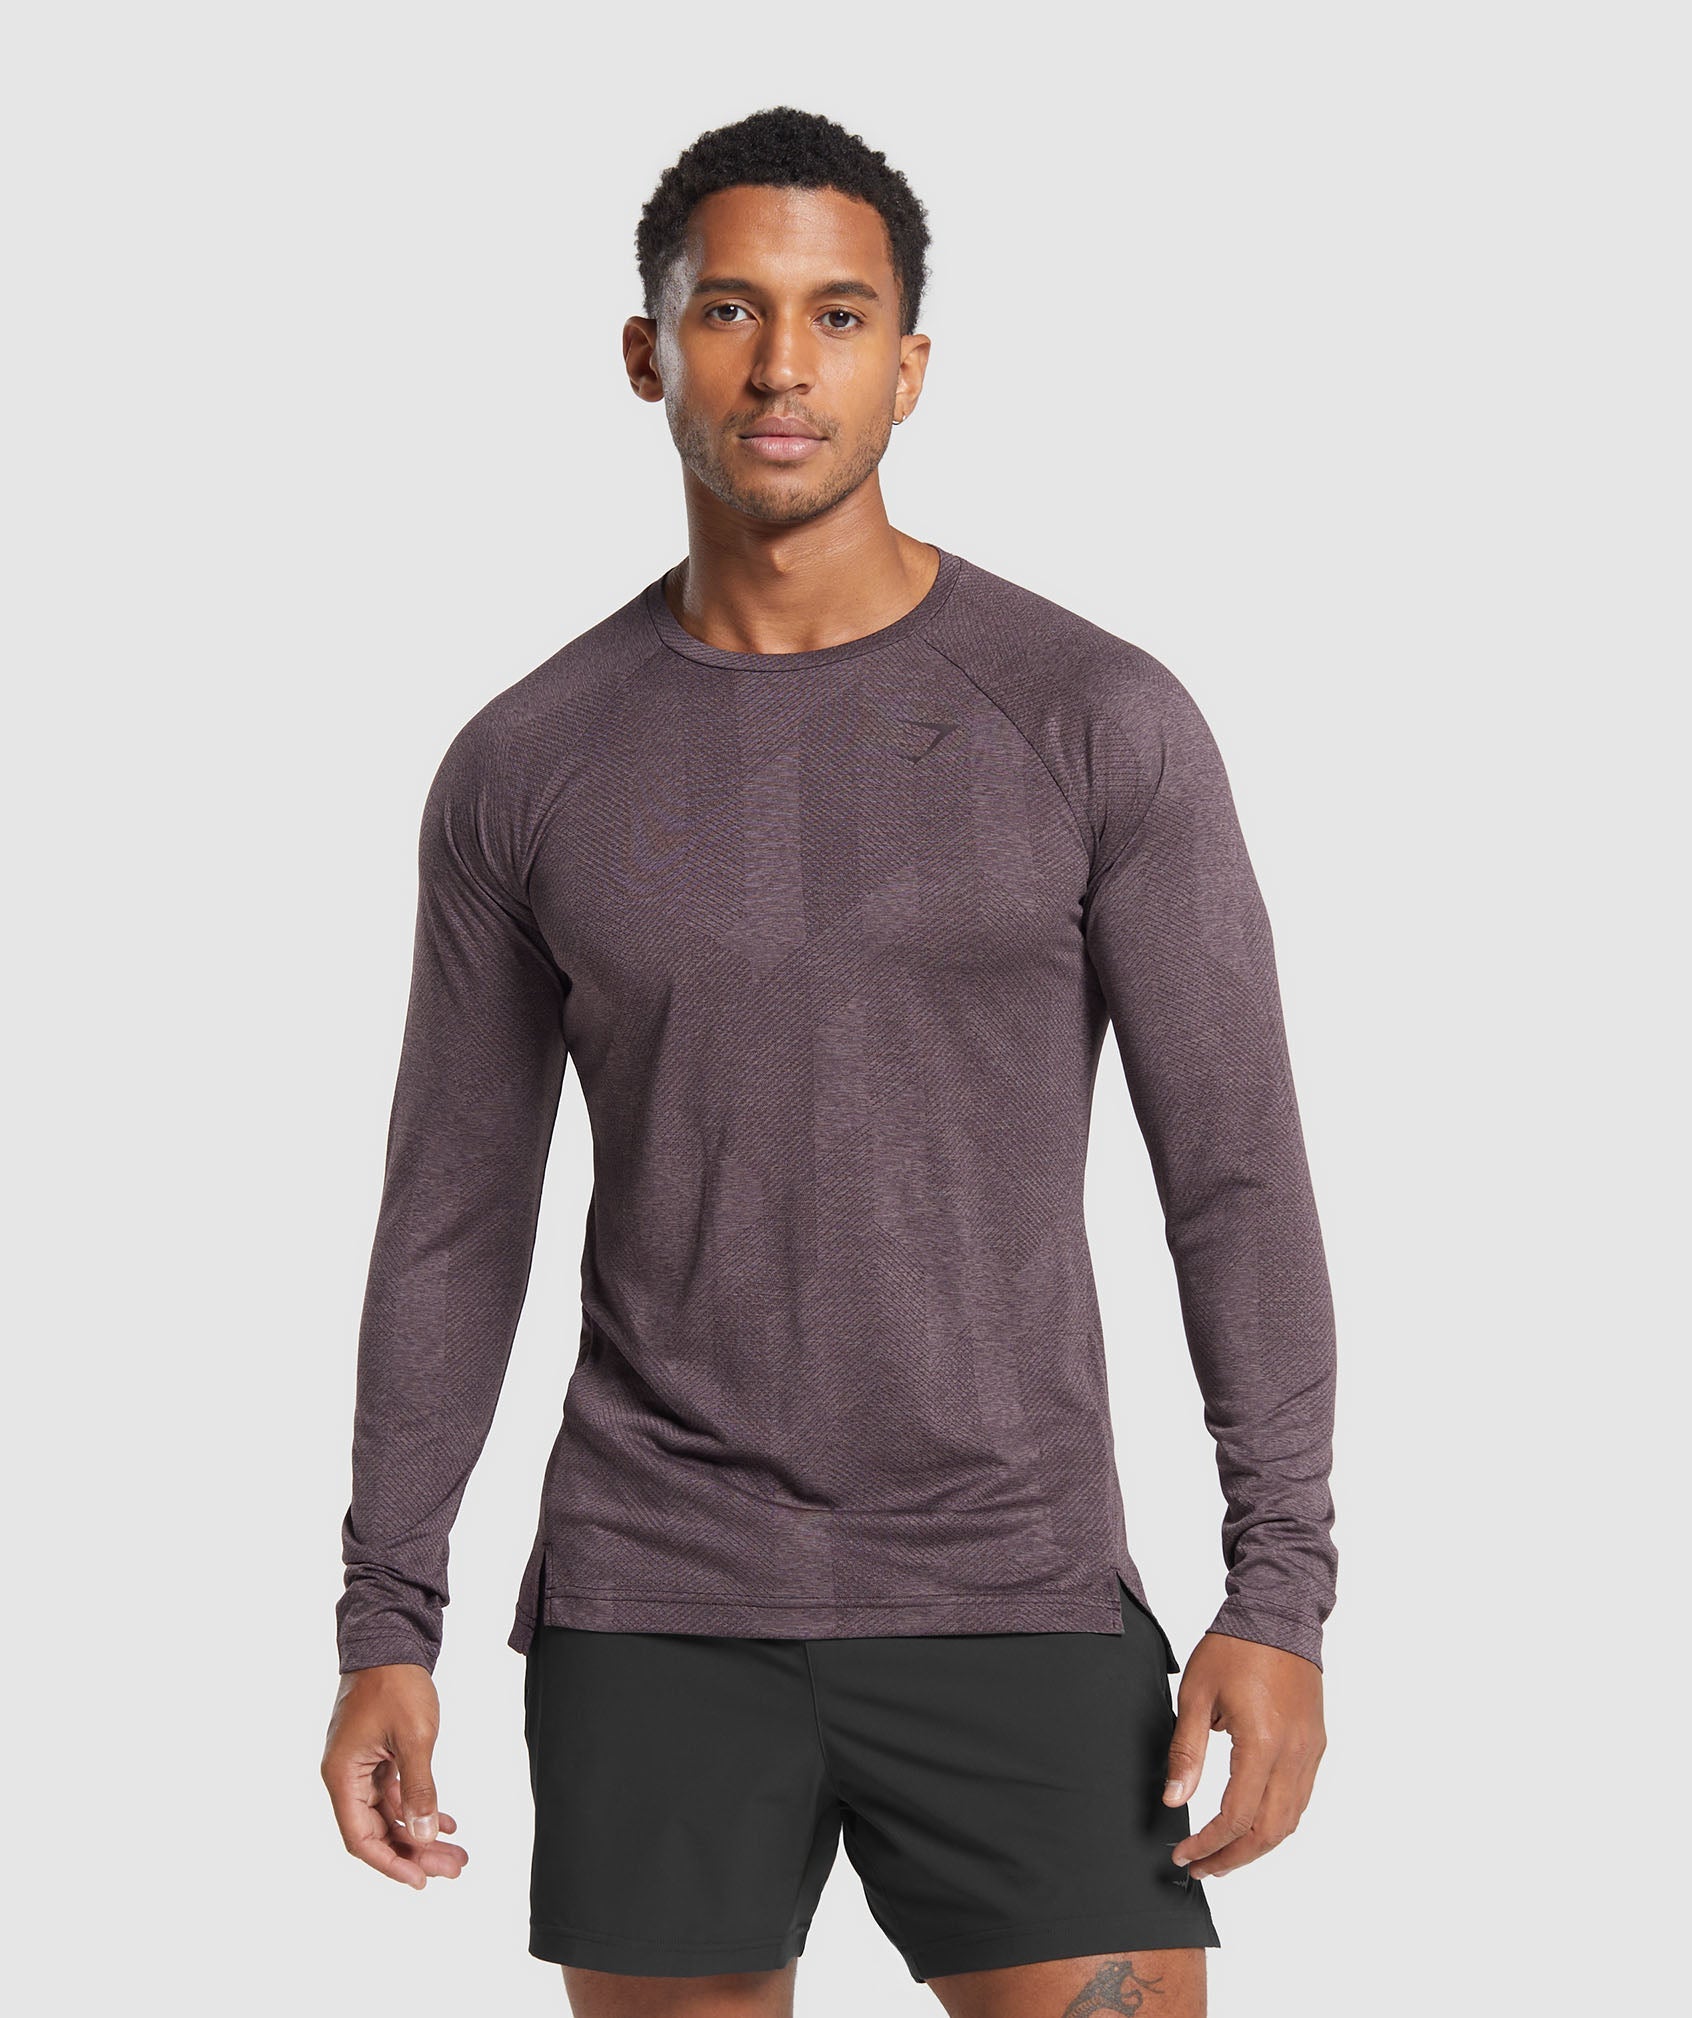 Apex Long Sleeve T-Shirt in {{variantColor} is out of stock